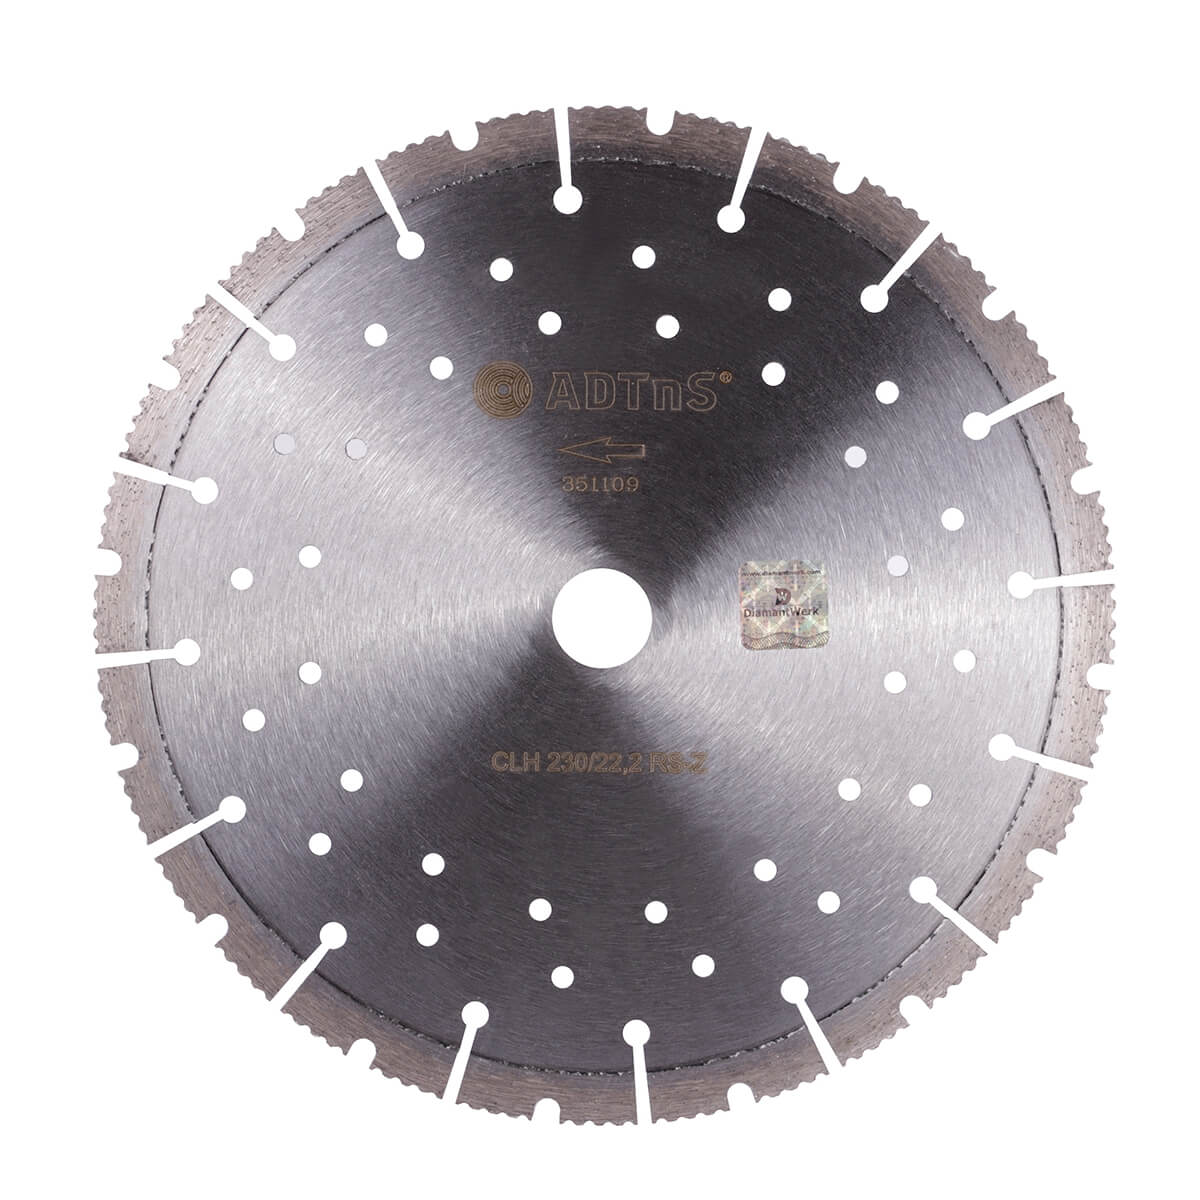 Diamond cutting blade 1A1RSS 230 CLH RS-Z